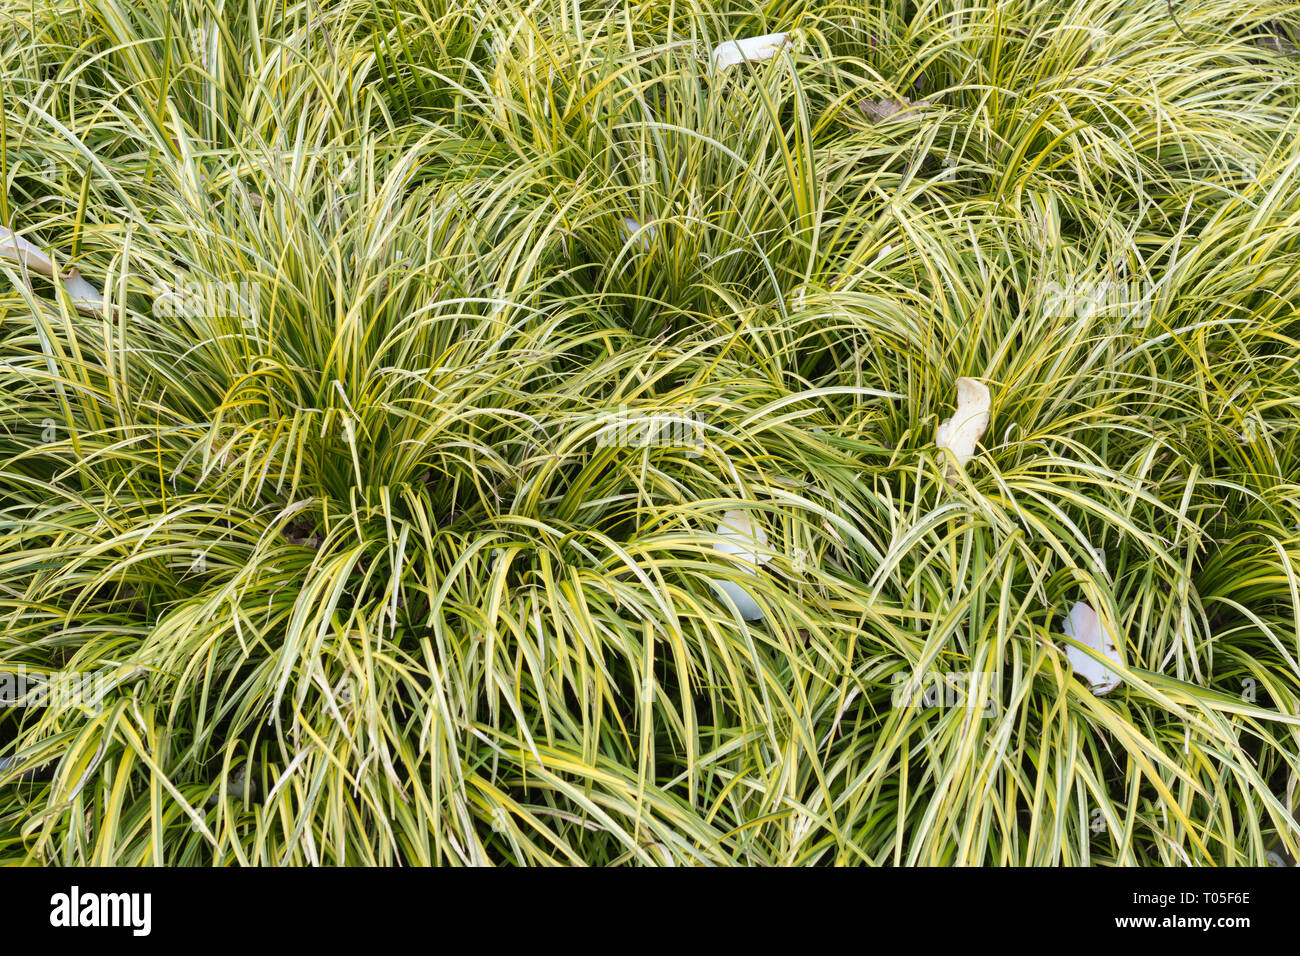 Acorus gramineus 'Ogon' or golden variegated sweet flag plants in an English garden during March, UK Stock Photo